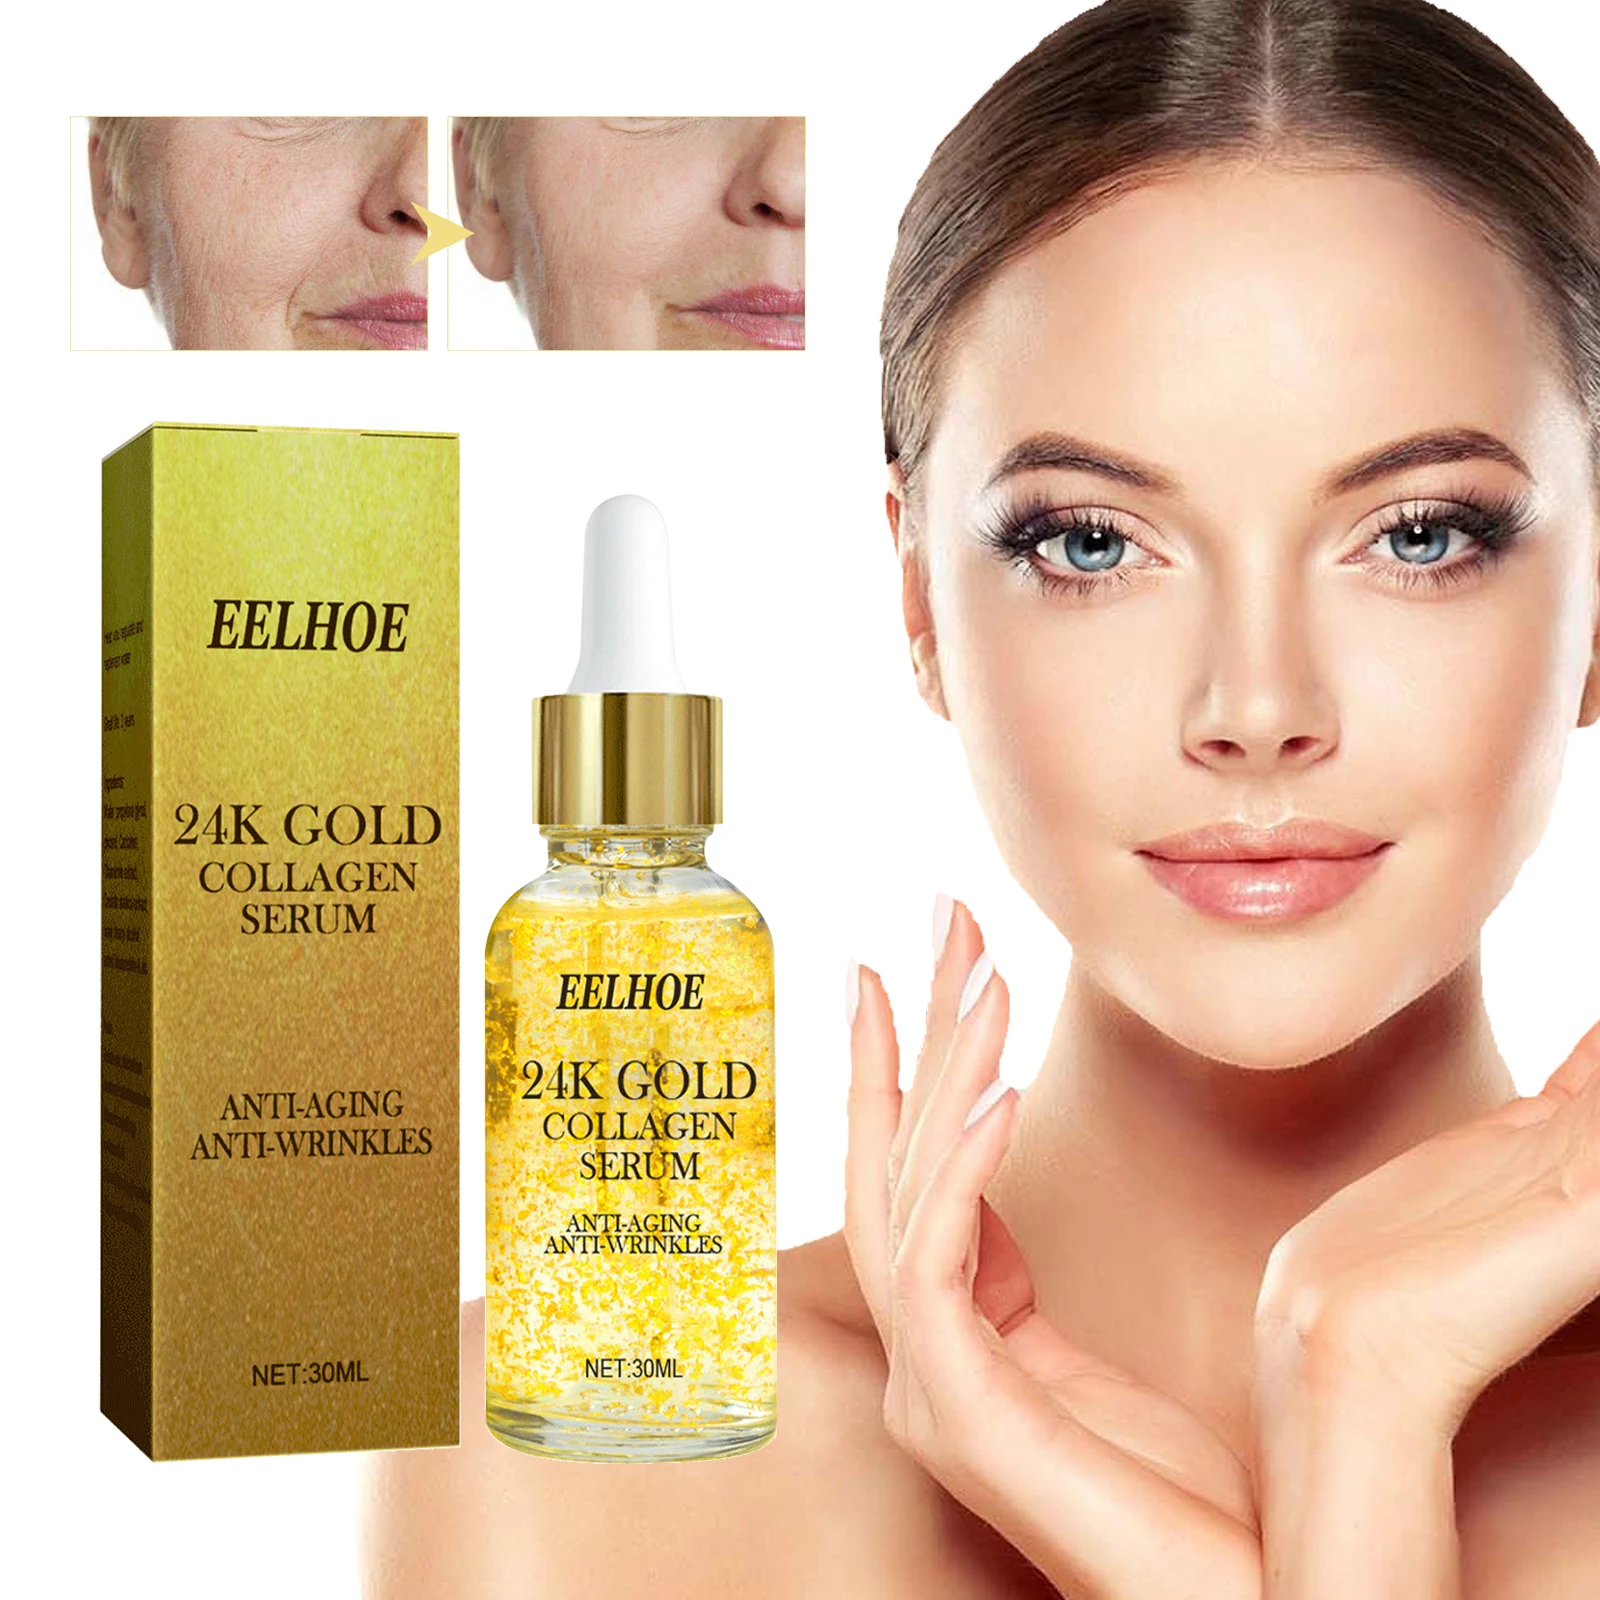 

24K Gold Face Serum Collagen Removal Wrinkle Moisturizing Whitening Lifting Firming Fade Fine Lines Shrink Pores Facial Essence